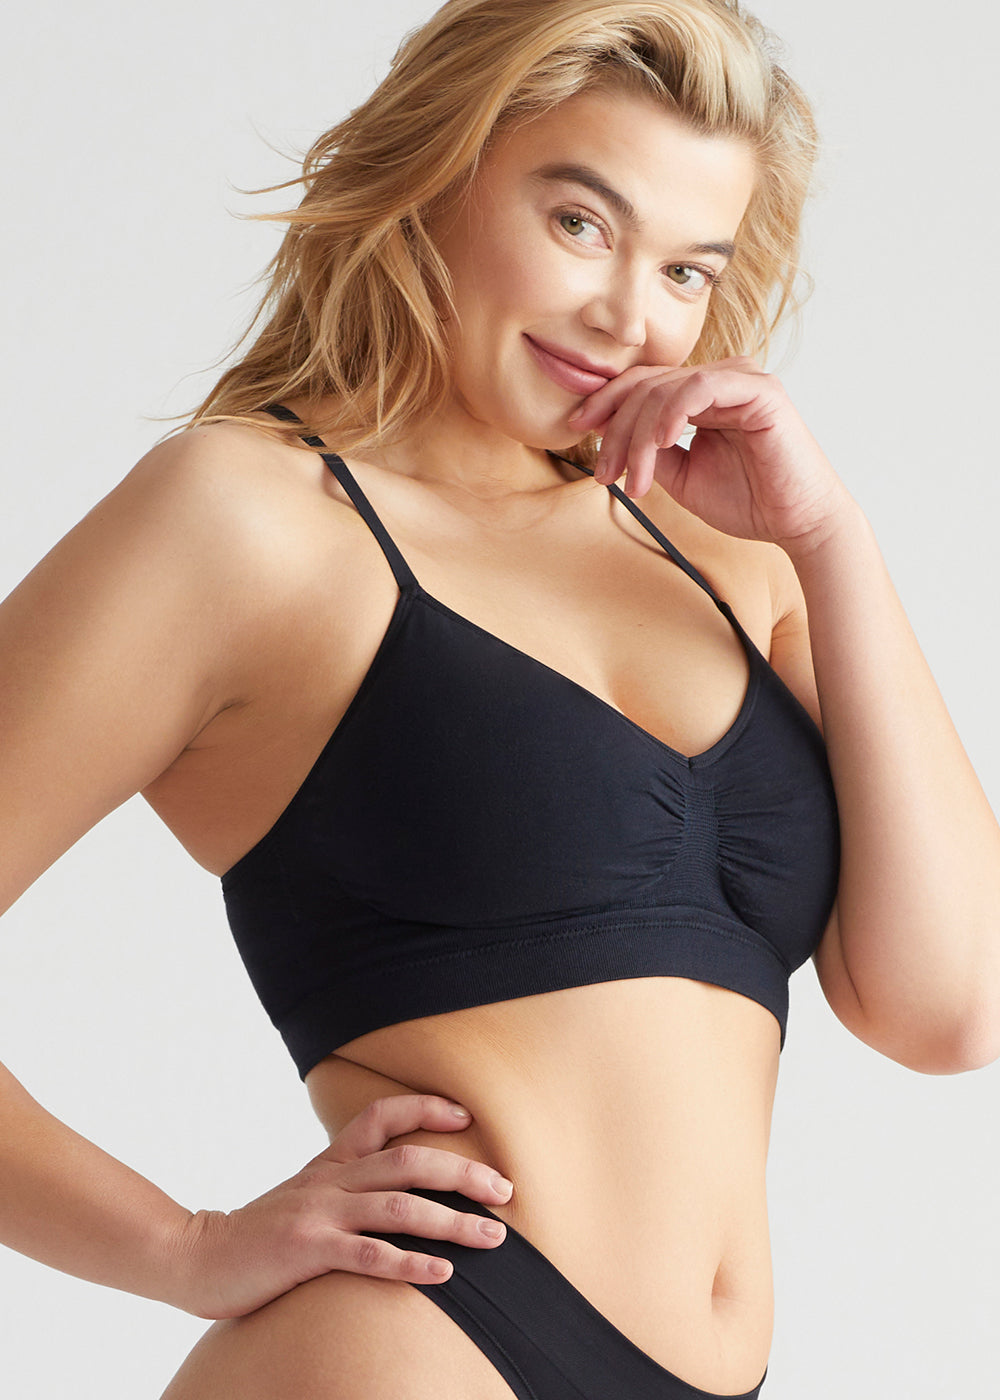 Yummie Women's Convertible Scoop Neck Bralette, Black, S/M at   Women's Clothing store